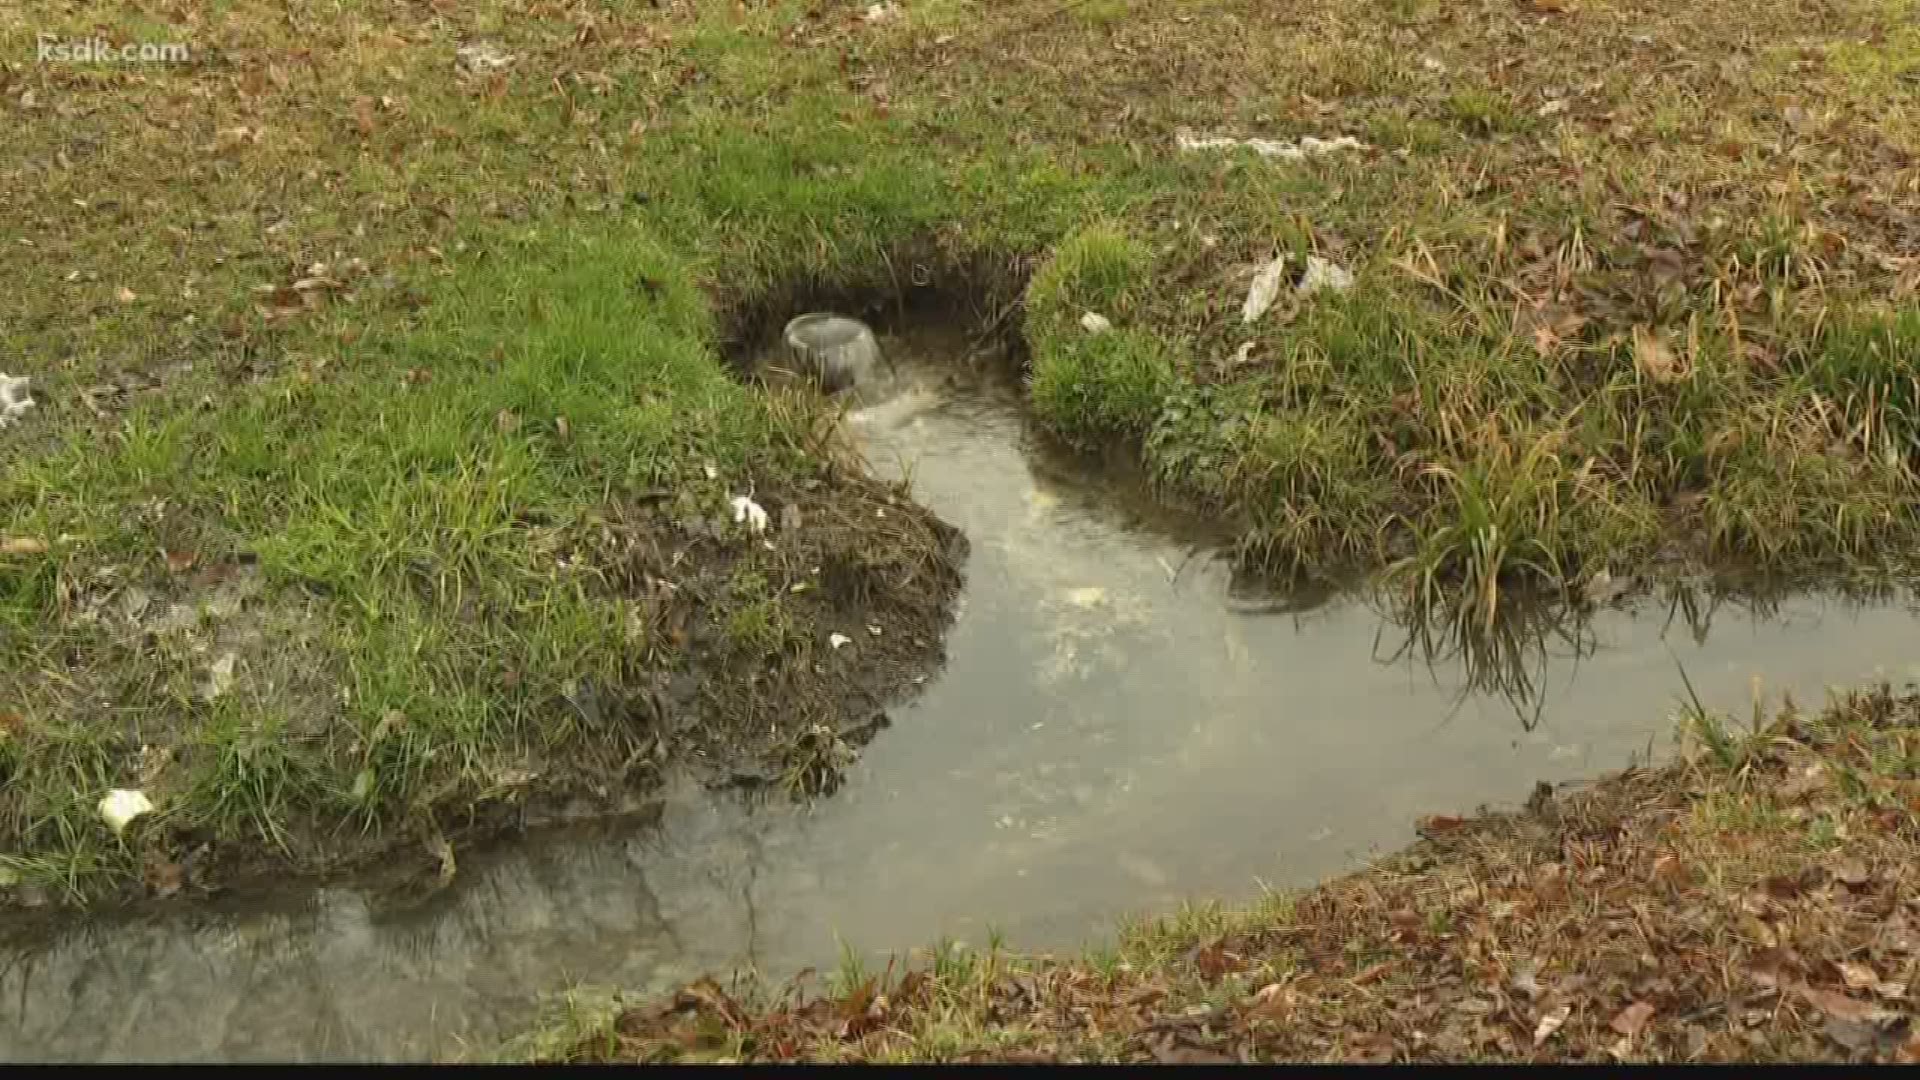 Raw sewage, flowing right through their backyards. It's a pretty gross sight for anyone, but for neighbors in Centreville, they say it's been like this for years.